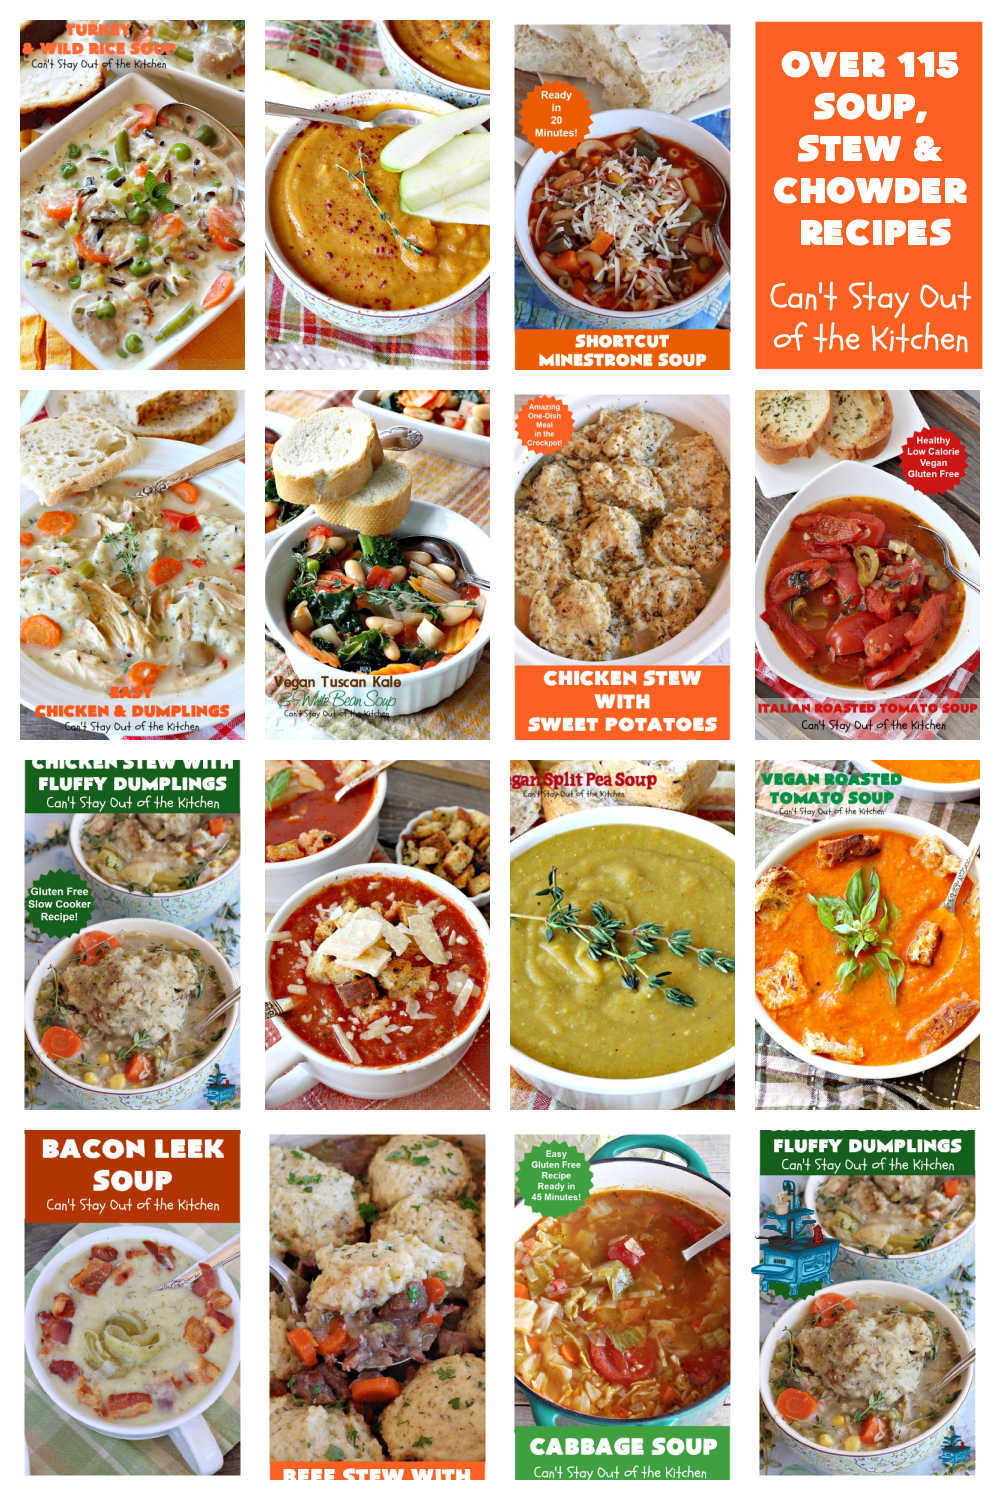 Soups, Stews & Chowder Recipes | Can't Stay Out of the Kitchen | Over 115 different #soup, #stew or #chowder #recipes covering #asparagus, #bean, #cabbage, #ham, #chicken, #potato #ChickenNoodle, #tomato, #vegan #vegetarian & #GlutenFree. #SoupStewAndChowderRecipes